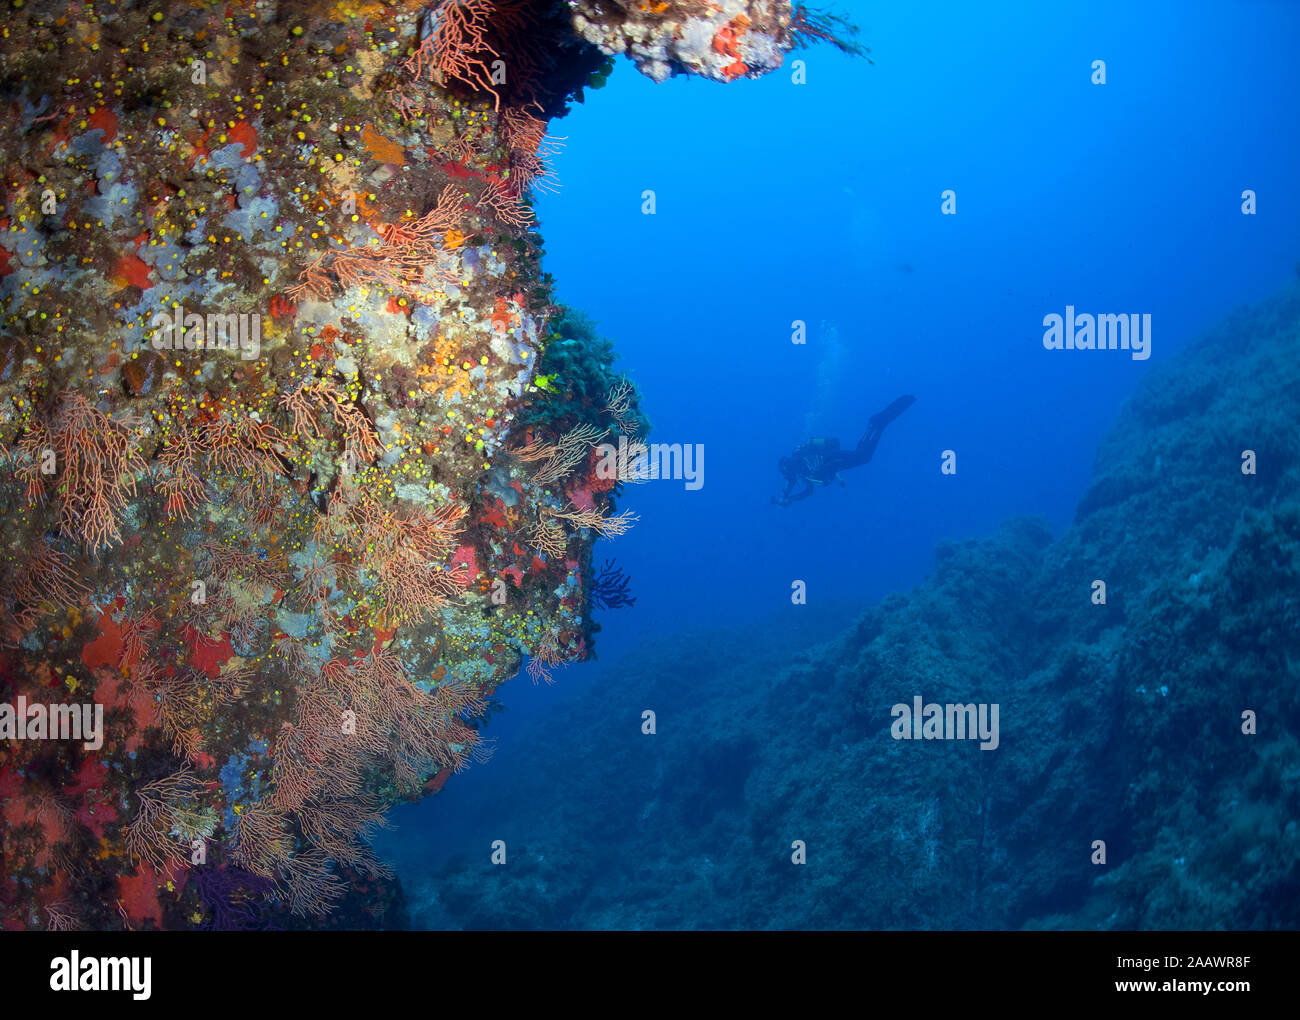 La Revellata reef at Calvi with diver in background at Corsica, France Stock Photo